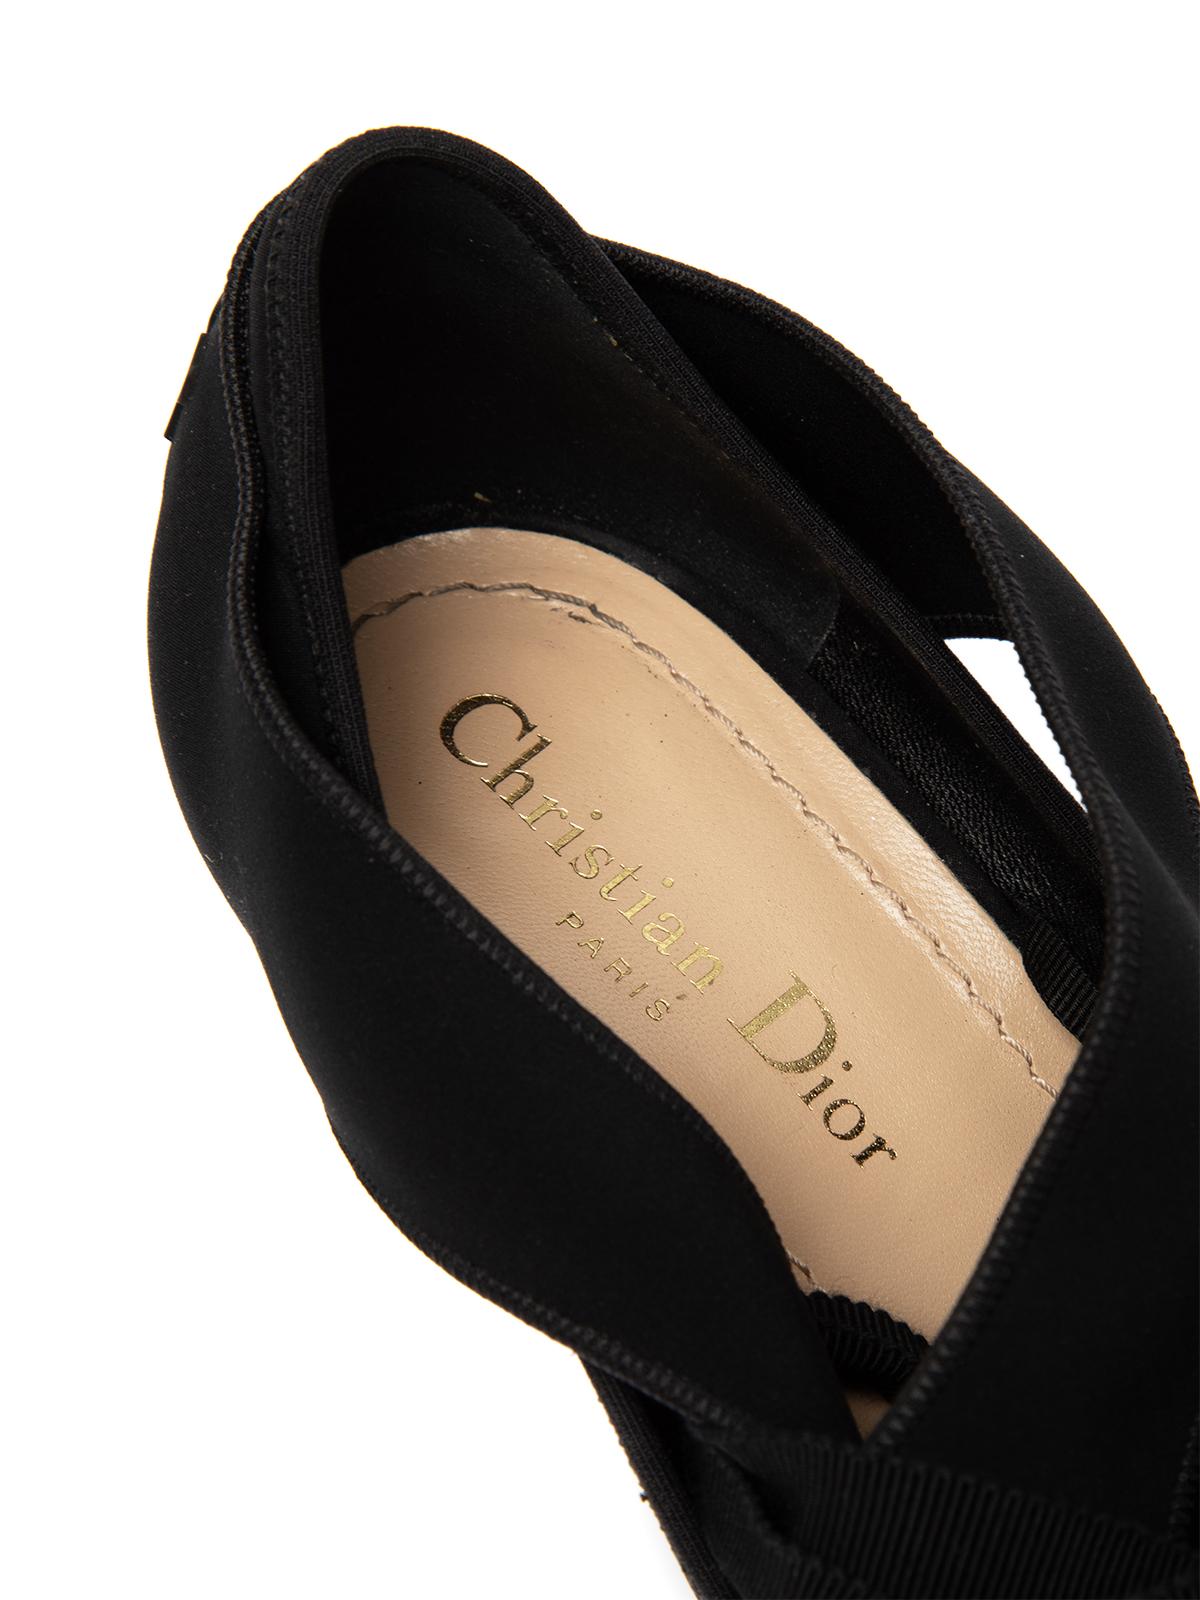 Pre-Loved Christian Dior Women's Cloth Tie Strappy Sandals In Excellent Condition For Sale In London, GB